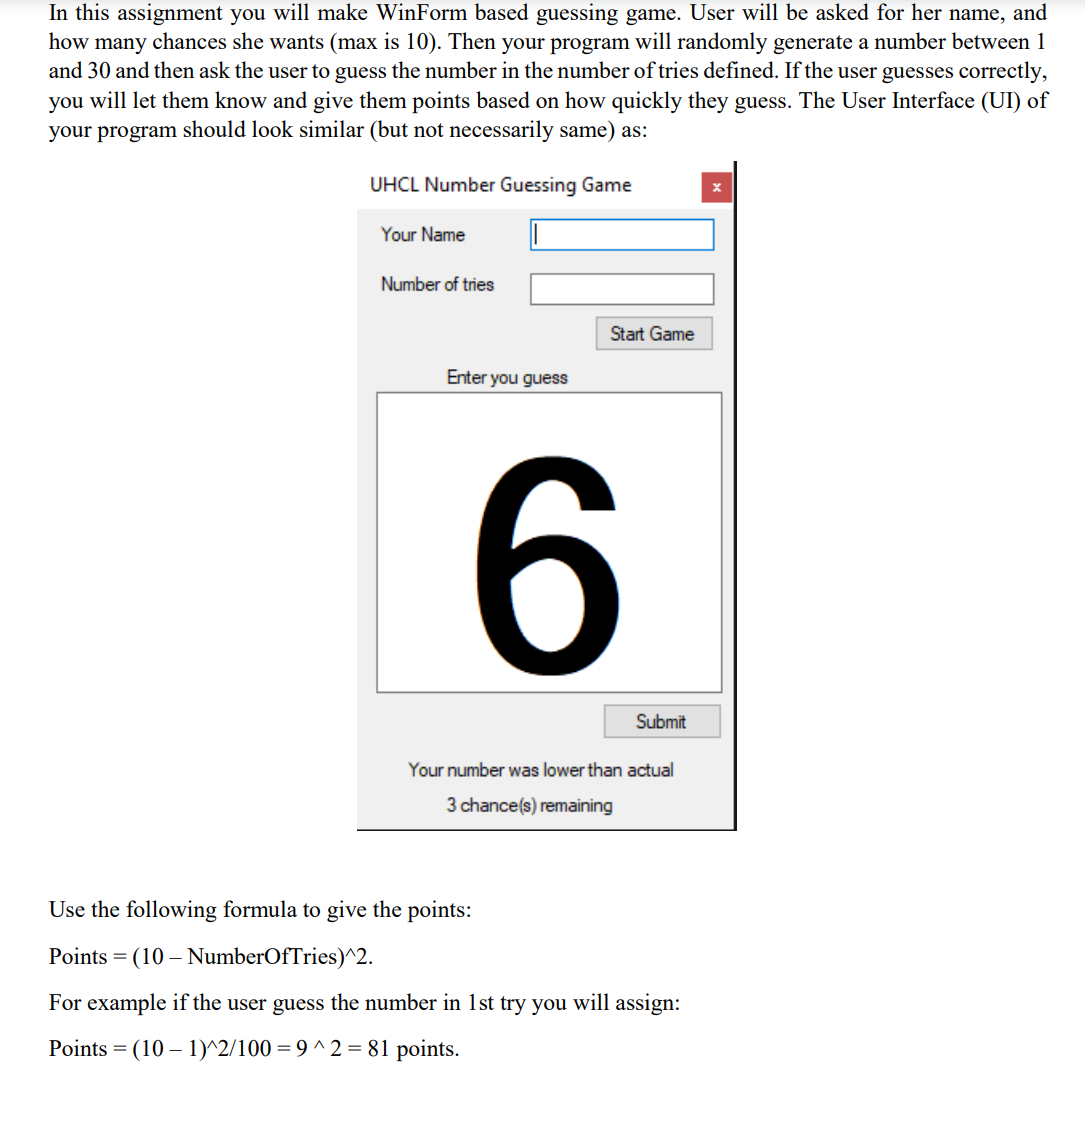 In this assignment you will make WinForm based guessing game. User will be asked for her name, and
how many chances she wants (max is 10). Then your program will randomly generate a number between 1
and 30 and then ask the user to guess the number in the number of tries defined. If the user guesses correctly,
you will let them know and give them points based on how quickly they guess. The User Interface (UI) of
your program should look similar (but not necessarily same) as:
UHCL Number Guessing Game
Your Name
Number of tries
Start Game
Enter you guess
Submit
Your number was lower than actual
3 chance(s) remaining
Use the following formula to give the points:
Points = (10 – NumberOfTries)^2.
For example if the user guess the number in 1st try you will assign:
Points = (10 – 1)^2/100 = 9 ^2 = 81 points.
-
